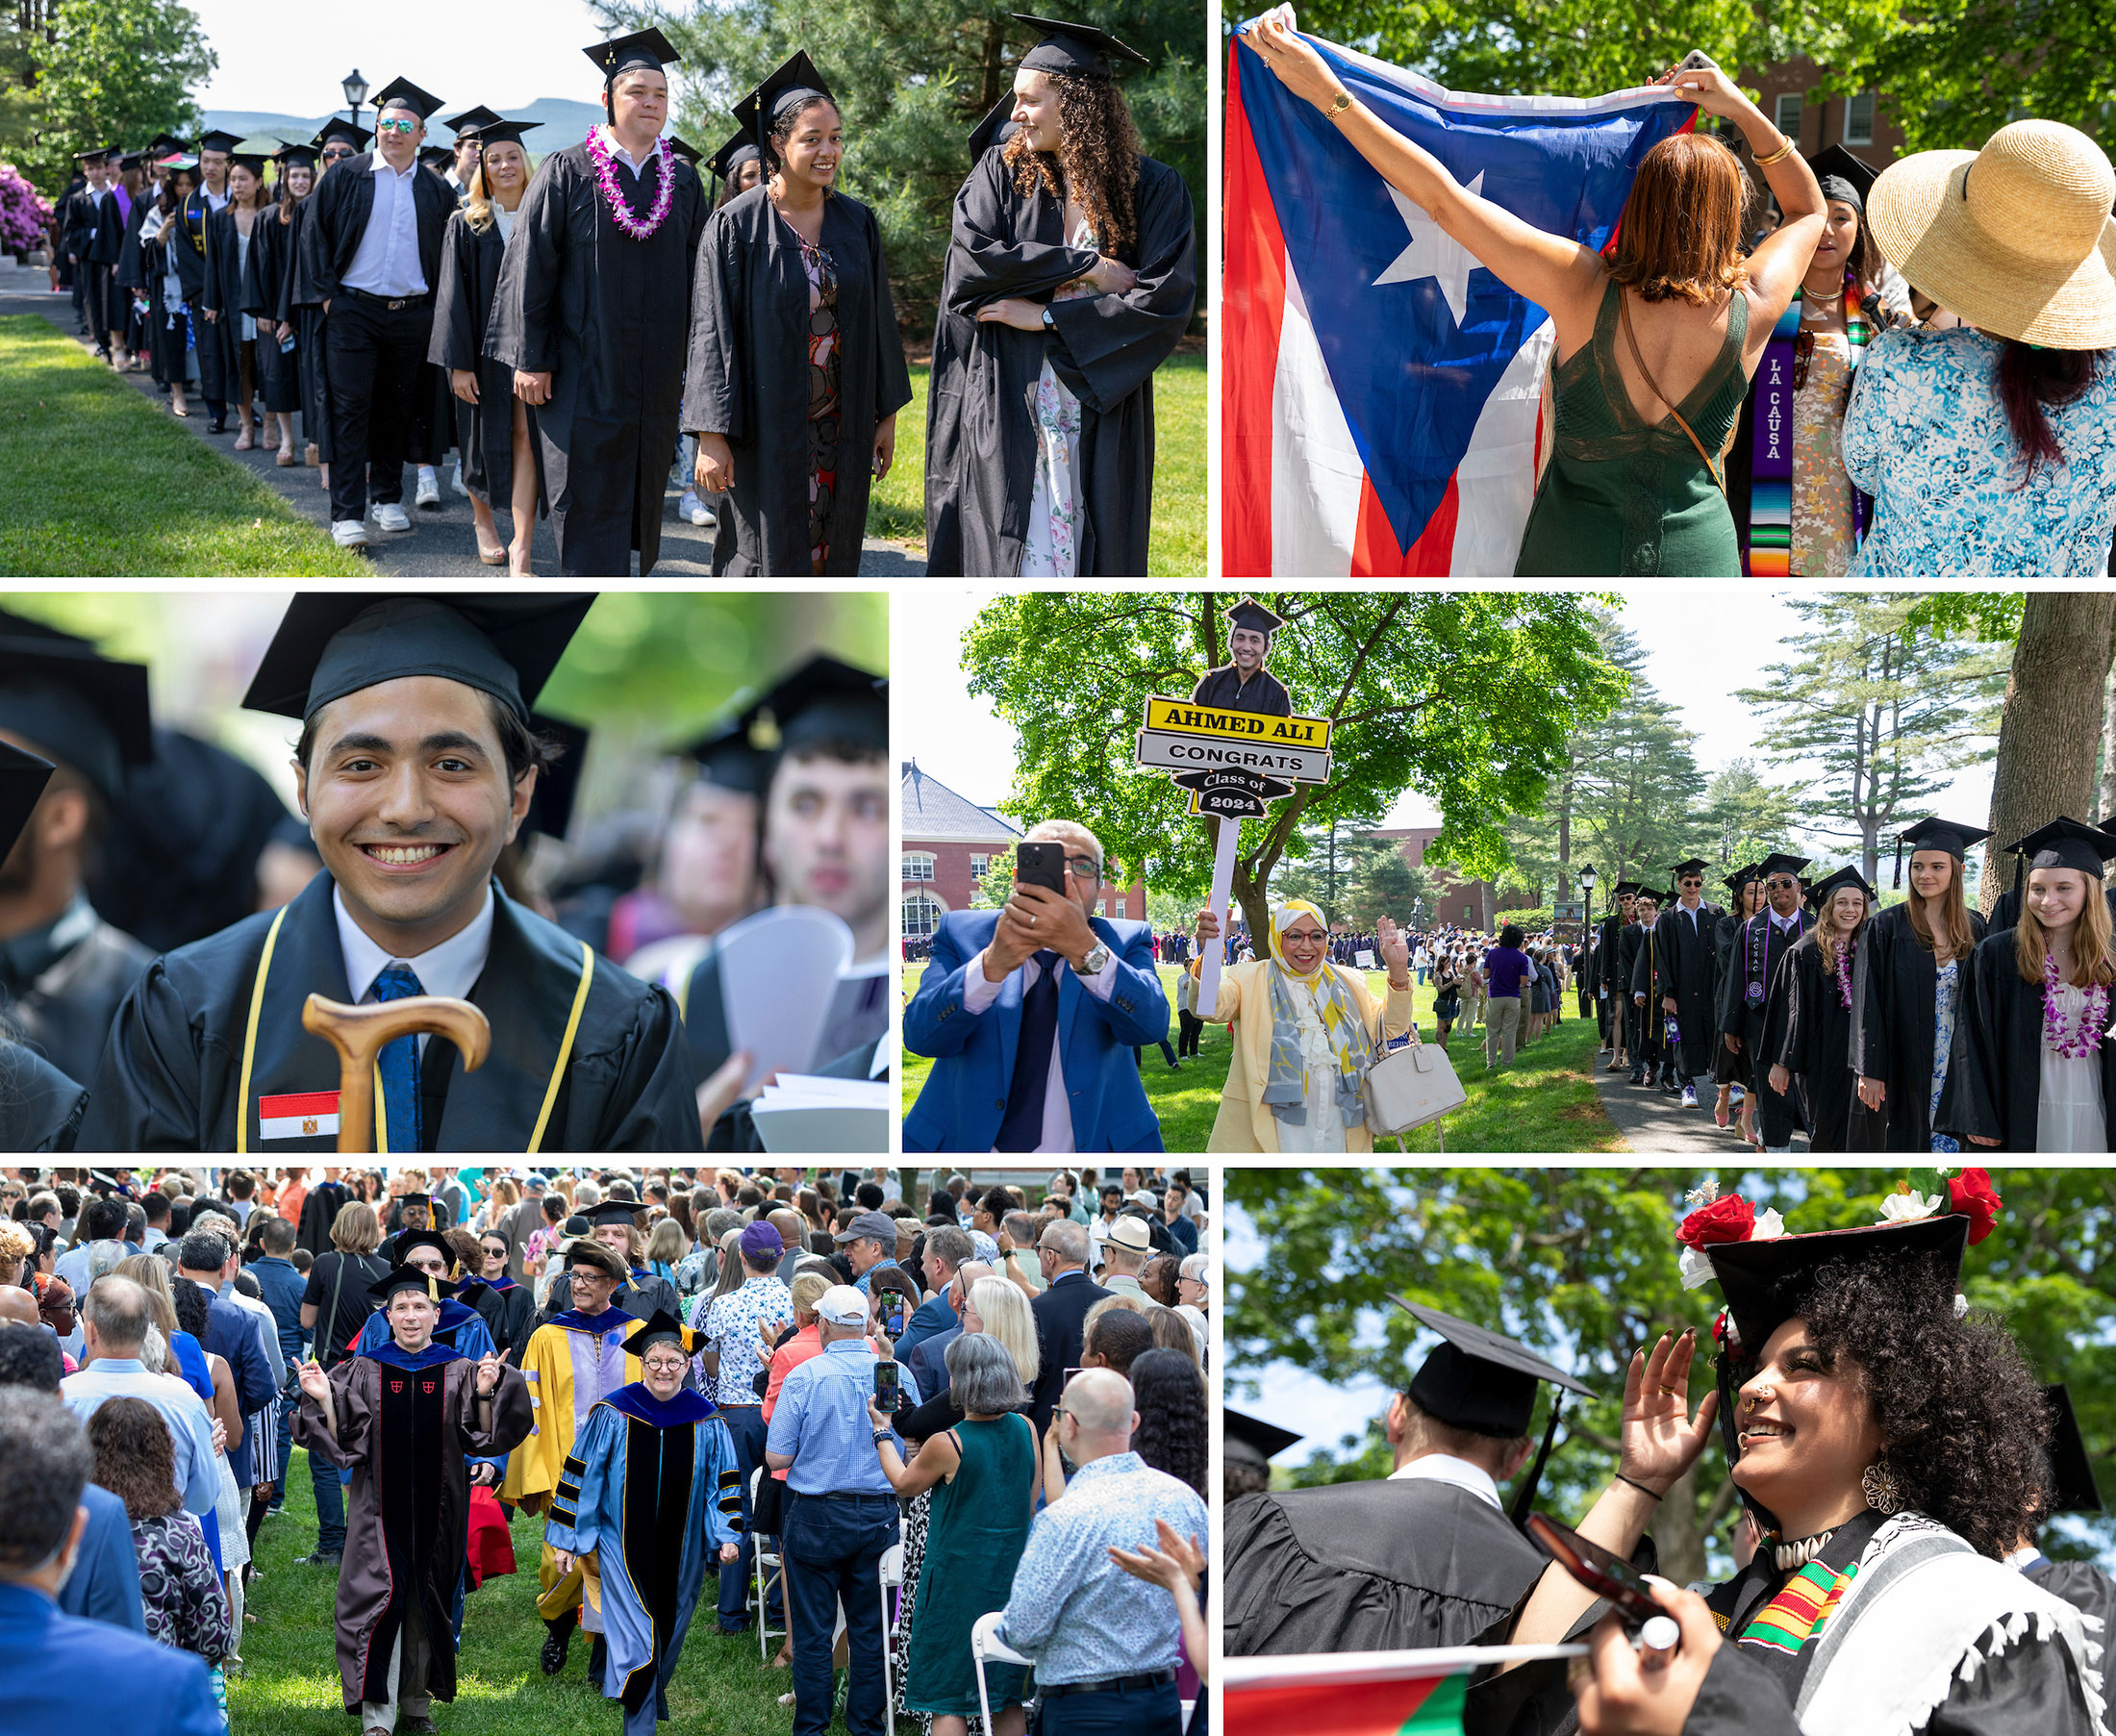 Collage of images showing students and faculty processing during Commencement and the audience cheering them on.